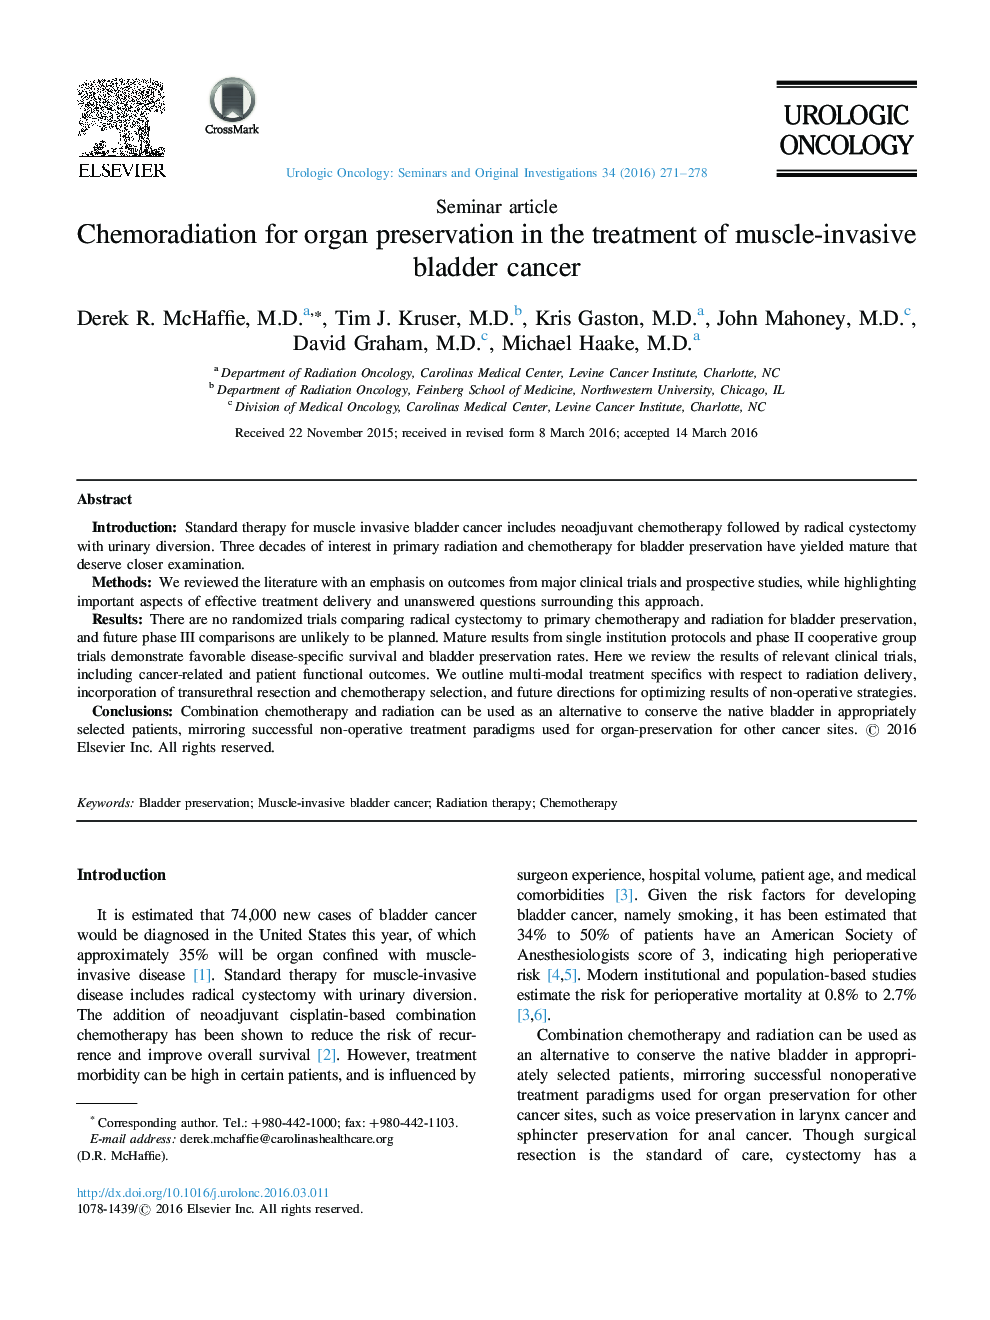 Chemoradiation for organ preservation in the treatment of muscle-invasive bladder cancer